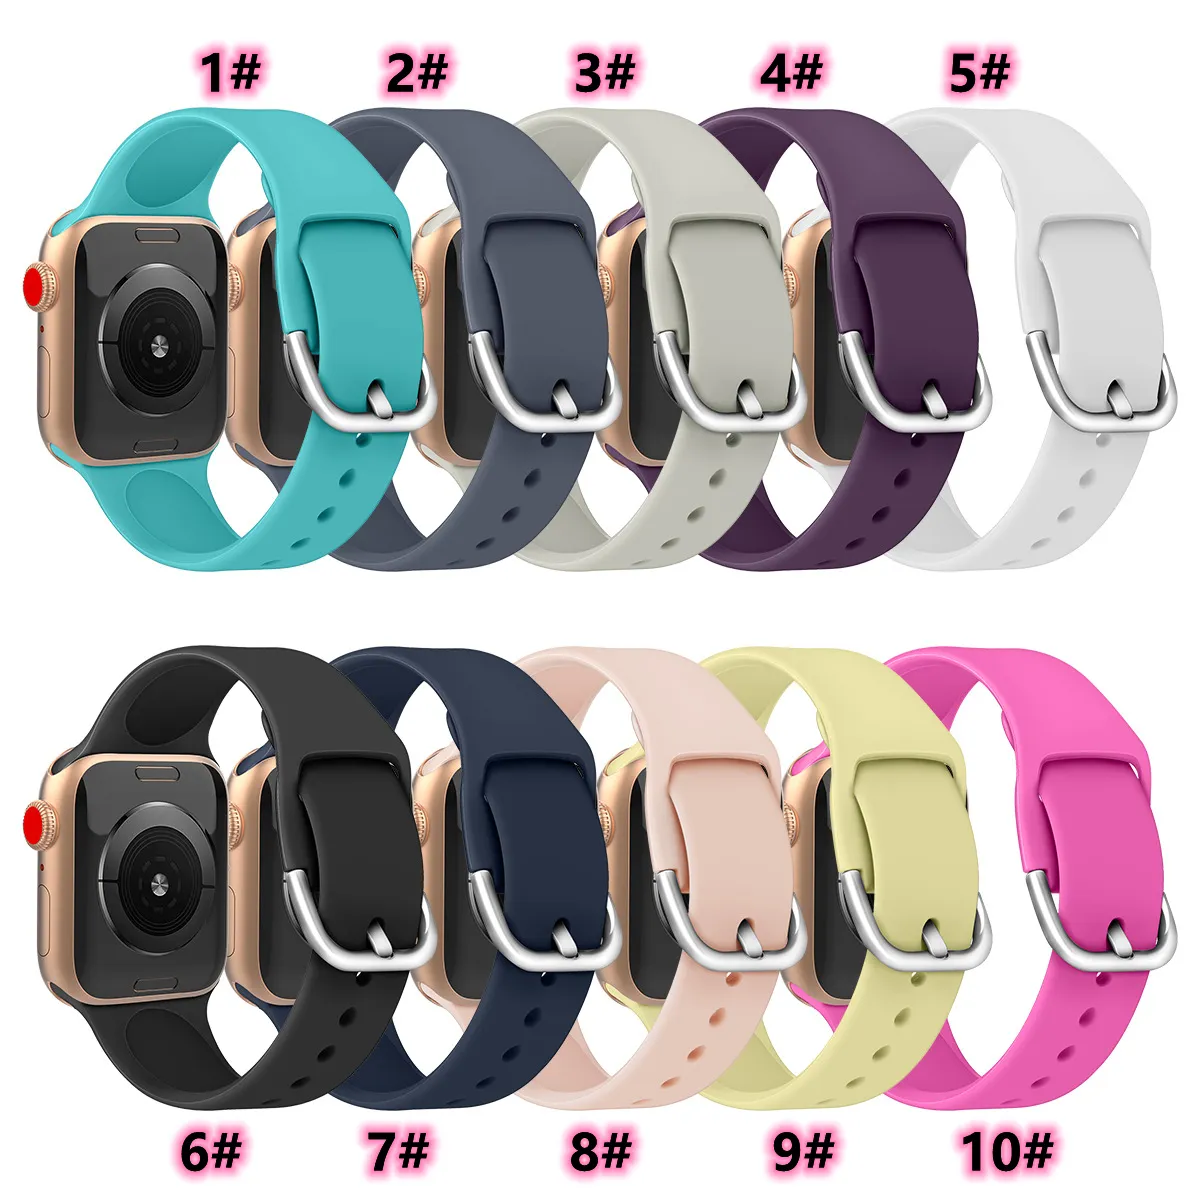 Update Charms Rubber Watch Strap Metal Buckle Silicone Sport Smart Watch Bands Accessories For Apple Watch Series 1 2 3 4 5 6 7